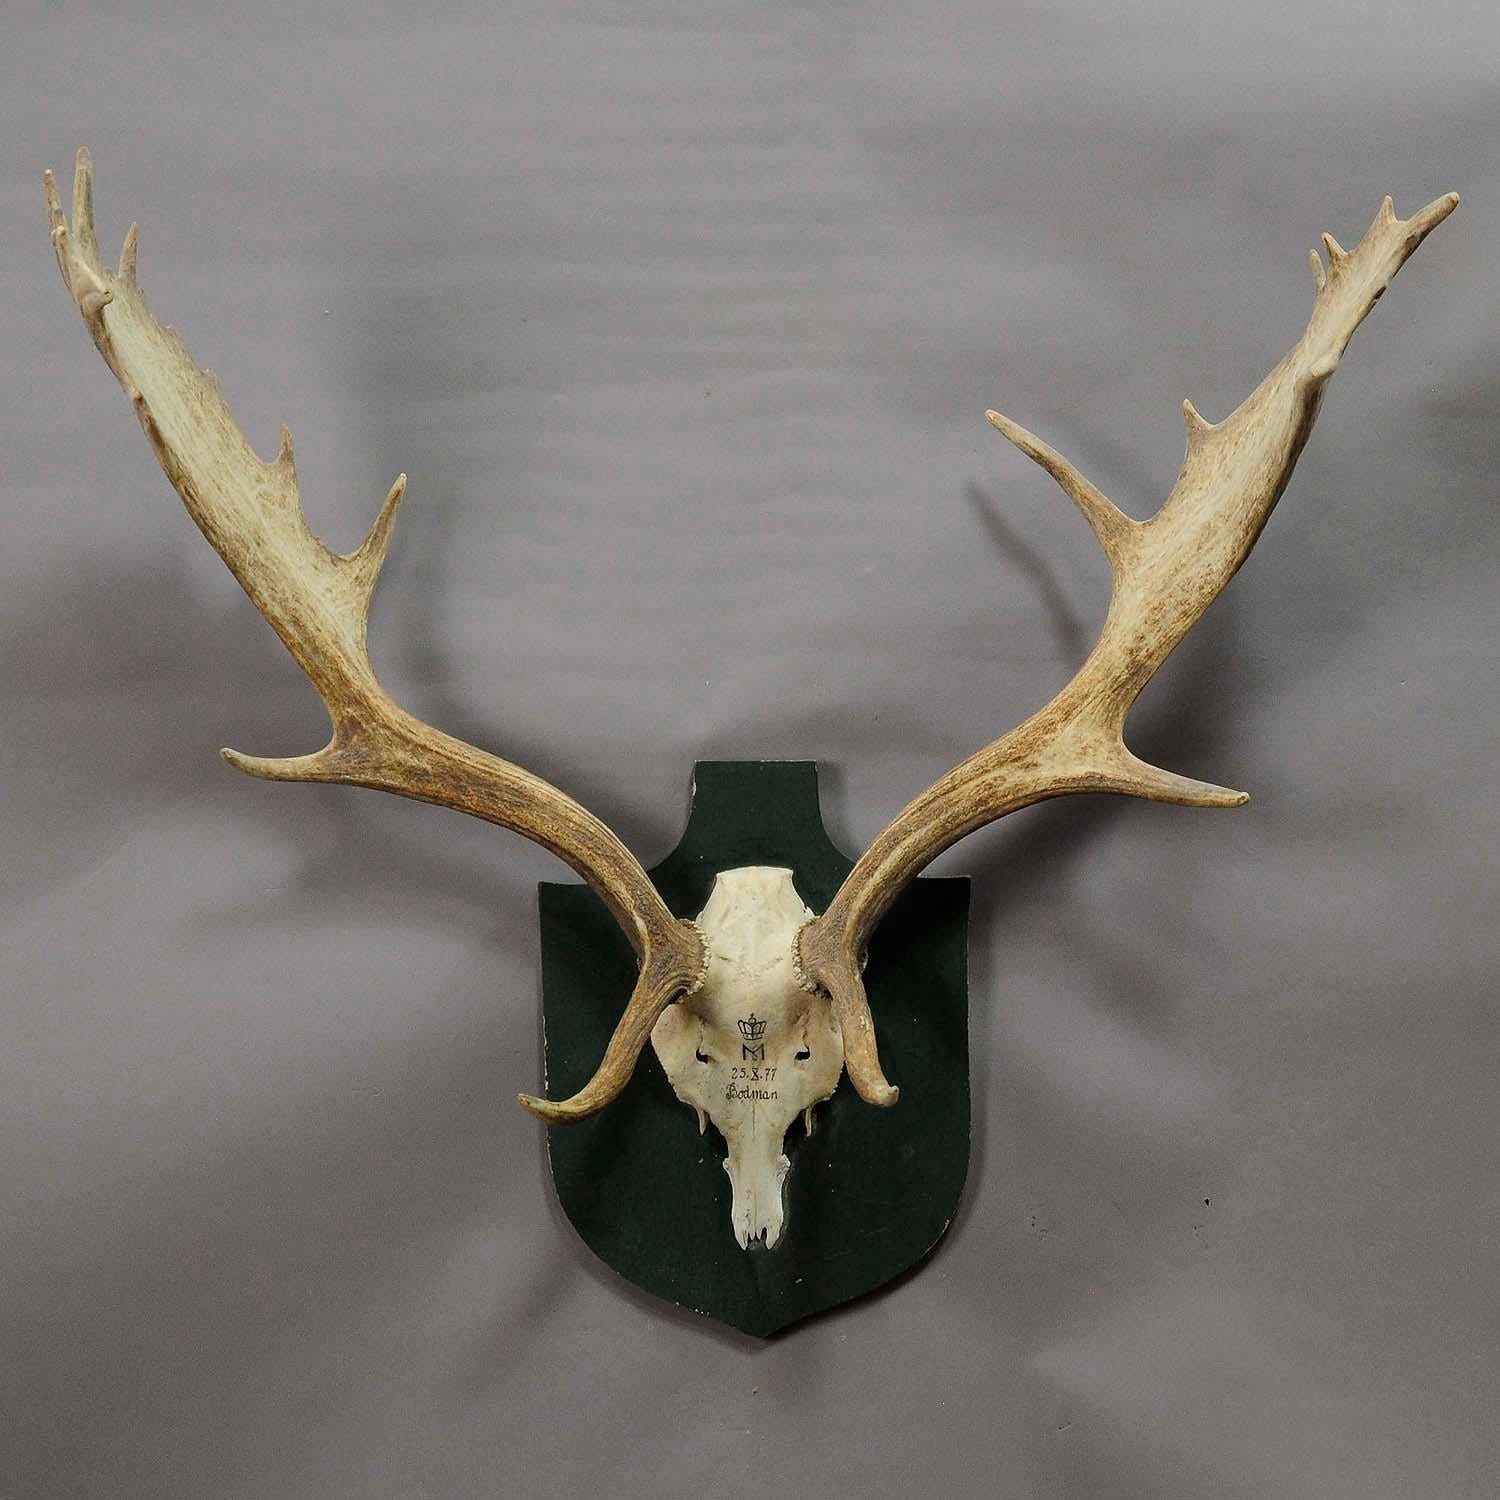 A great Black Forest fallow deer trophy from the palace of Salem in south Germany. Shoot by a member of the Lordly family of Badenin, 1977. Handwritten inscriptions on the skull with, place of the hunt and date 1977. Mounted on a wooden plaque, good